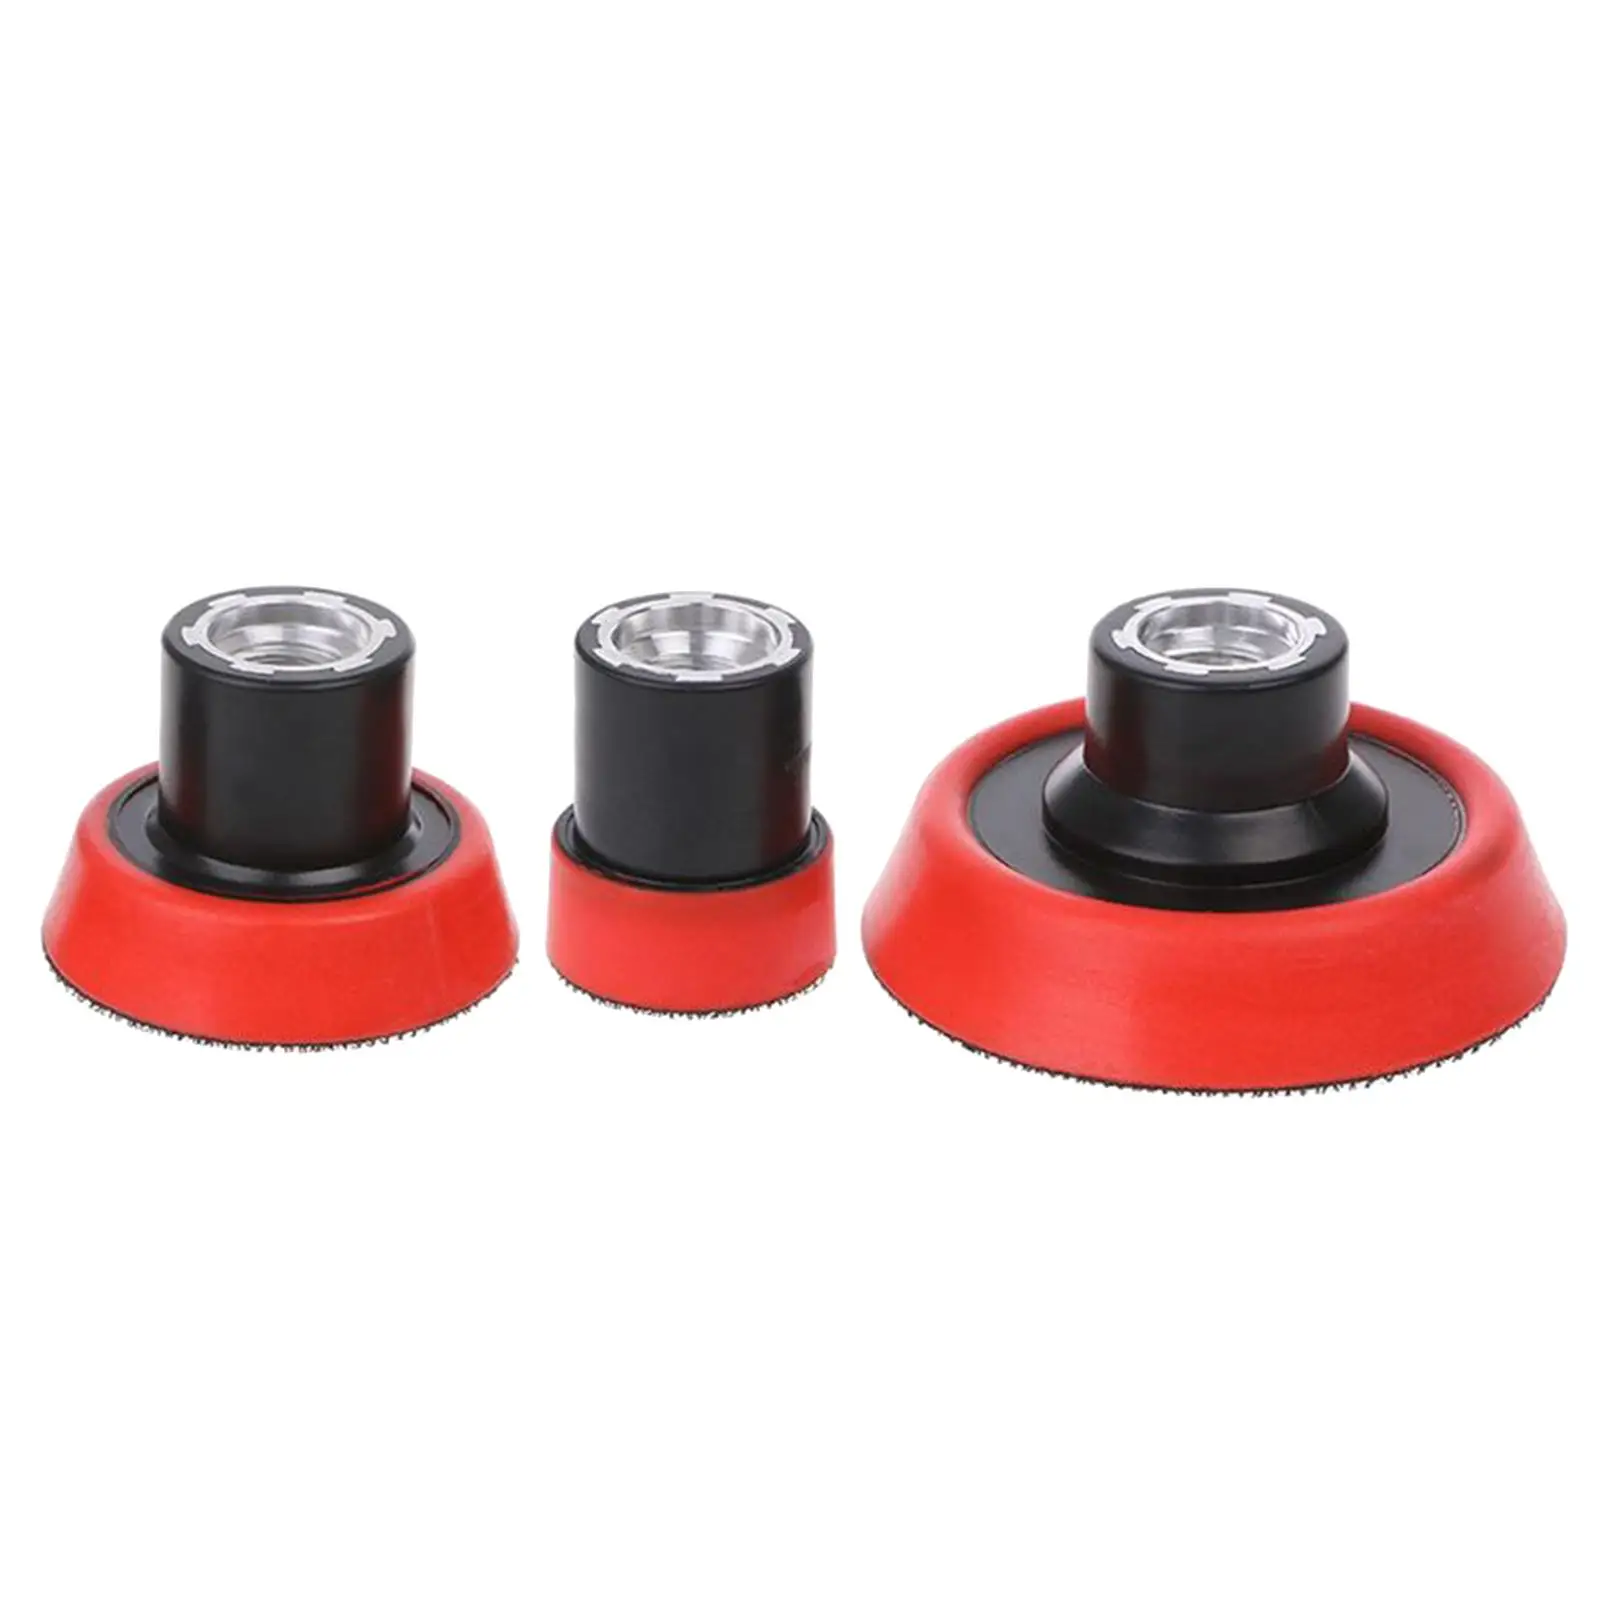 3 Pieces M14 Accs Buffering Durable Backing Plate Polisher for Polishing